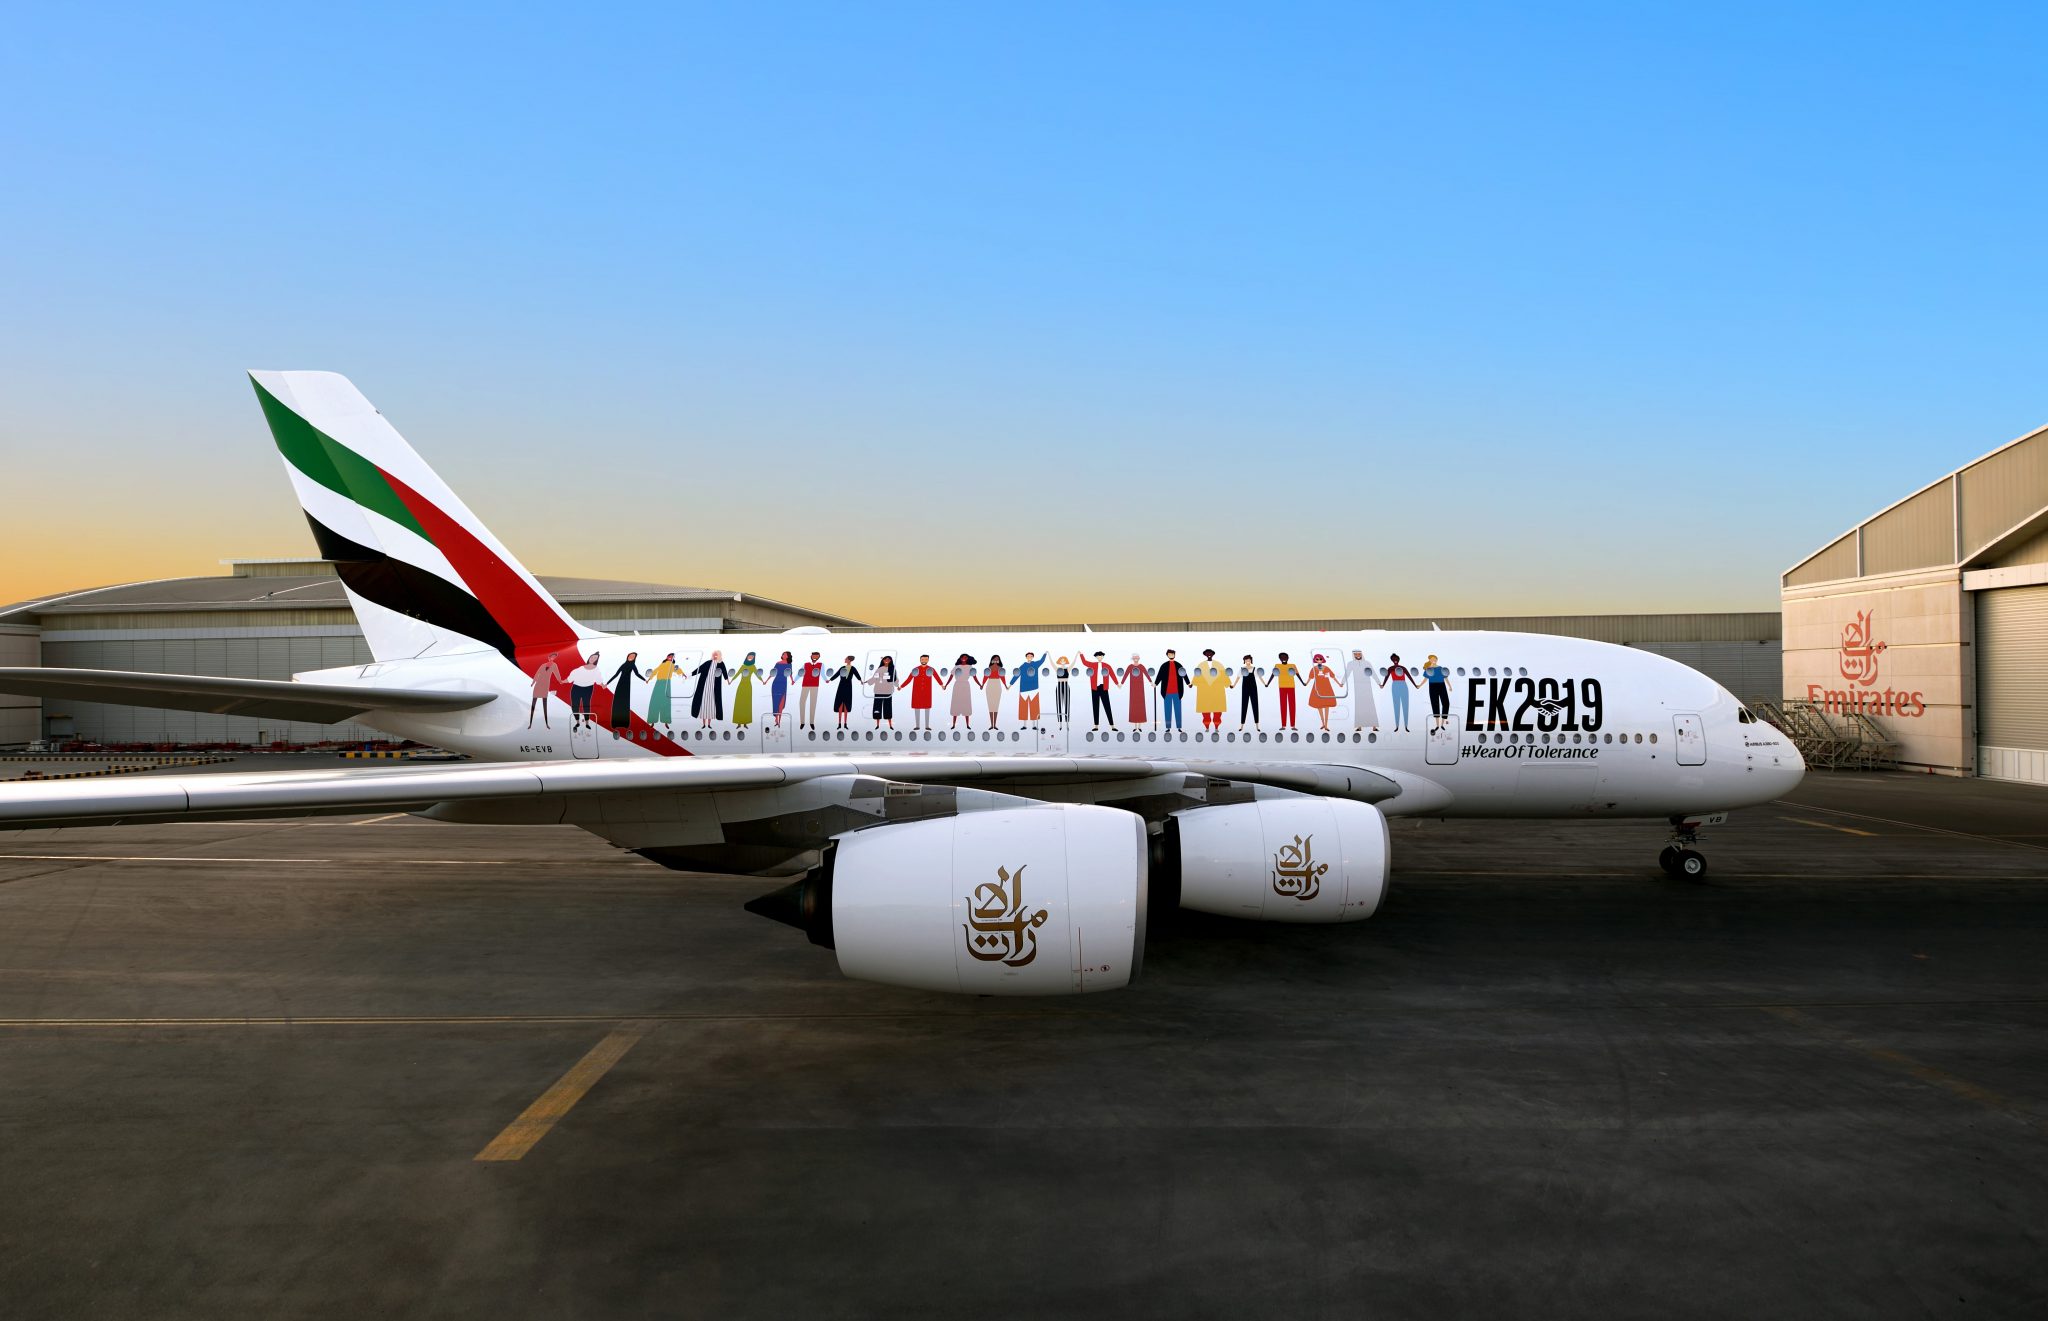 Is Emirates' New 'Year of Tolerance' Plane a PR Stunt to Gloss Over the UAE's "Appalling Human Rights Record"?